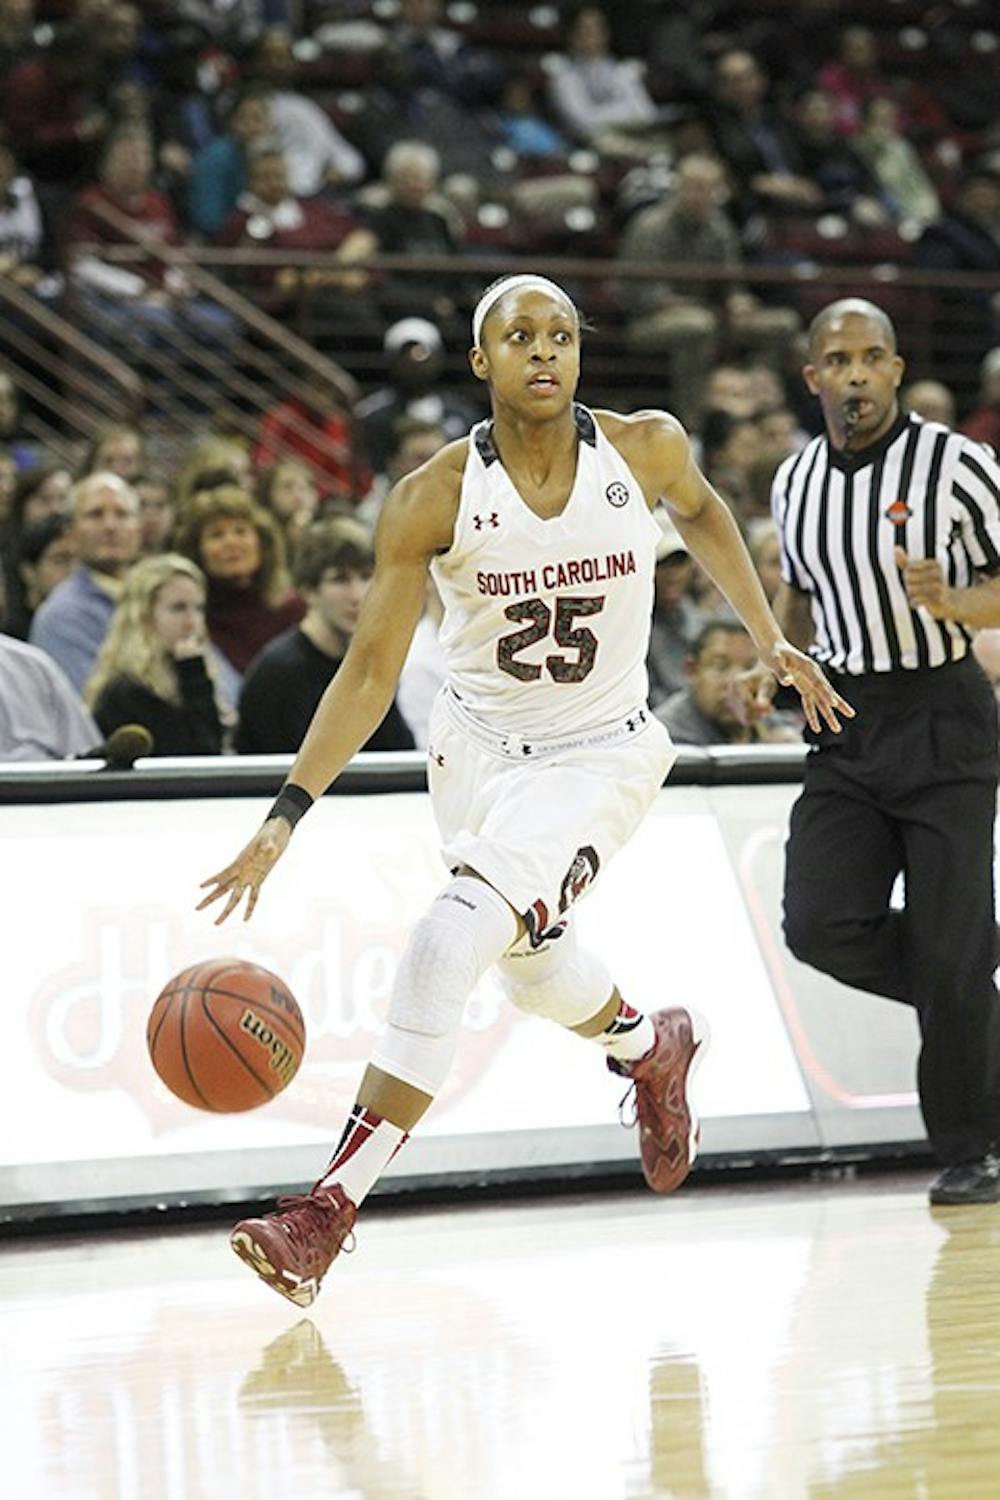 <p>South Carolina junior Tiffany Mitchell led South Carolina with 15 points in the Gamecocks' 73-56 win over Arkansas Thursday night.  Mitchell has now scored in double-digits in 13 straight games and No. 2 South Carolina puts its 30-game home winning streak to test against No. 6 Tennessee on Monday. </p>